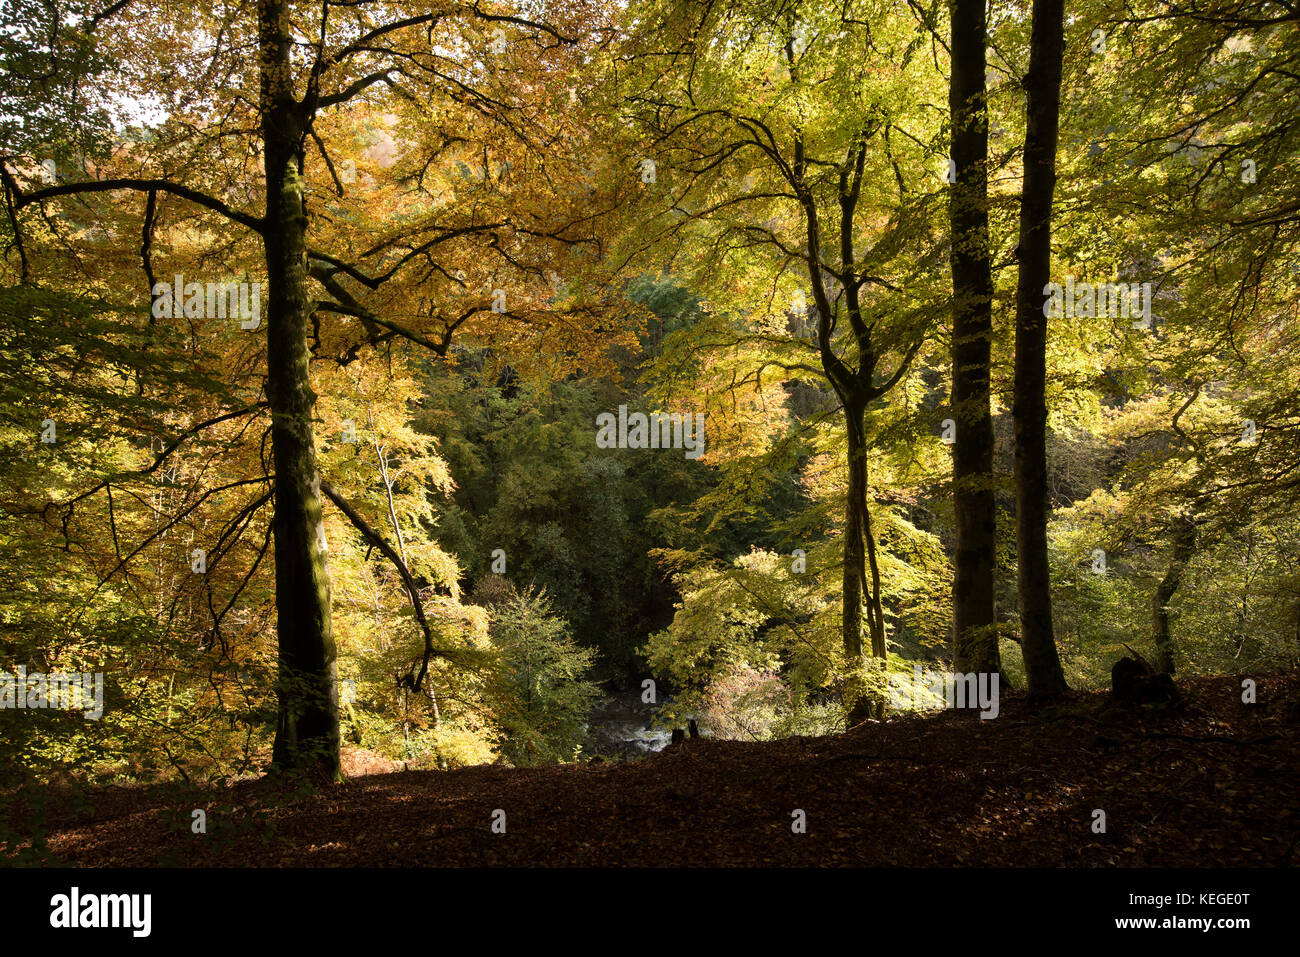 Autumnal woodland, Birks of Aberfeldy, Scotland. The inspiration for a Robert Burns poem and a popular walking area. Stock Photo